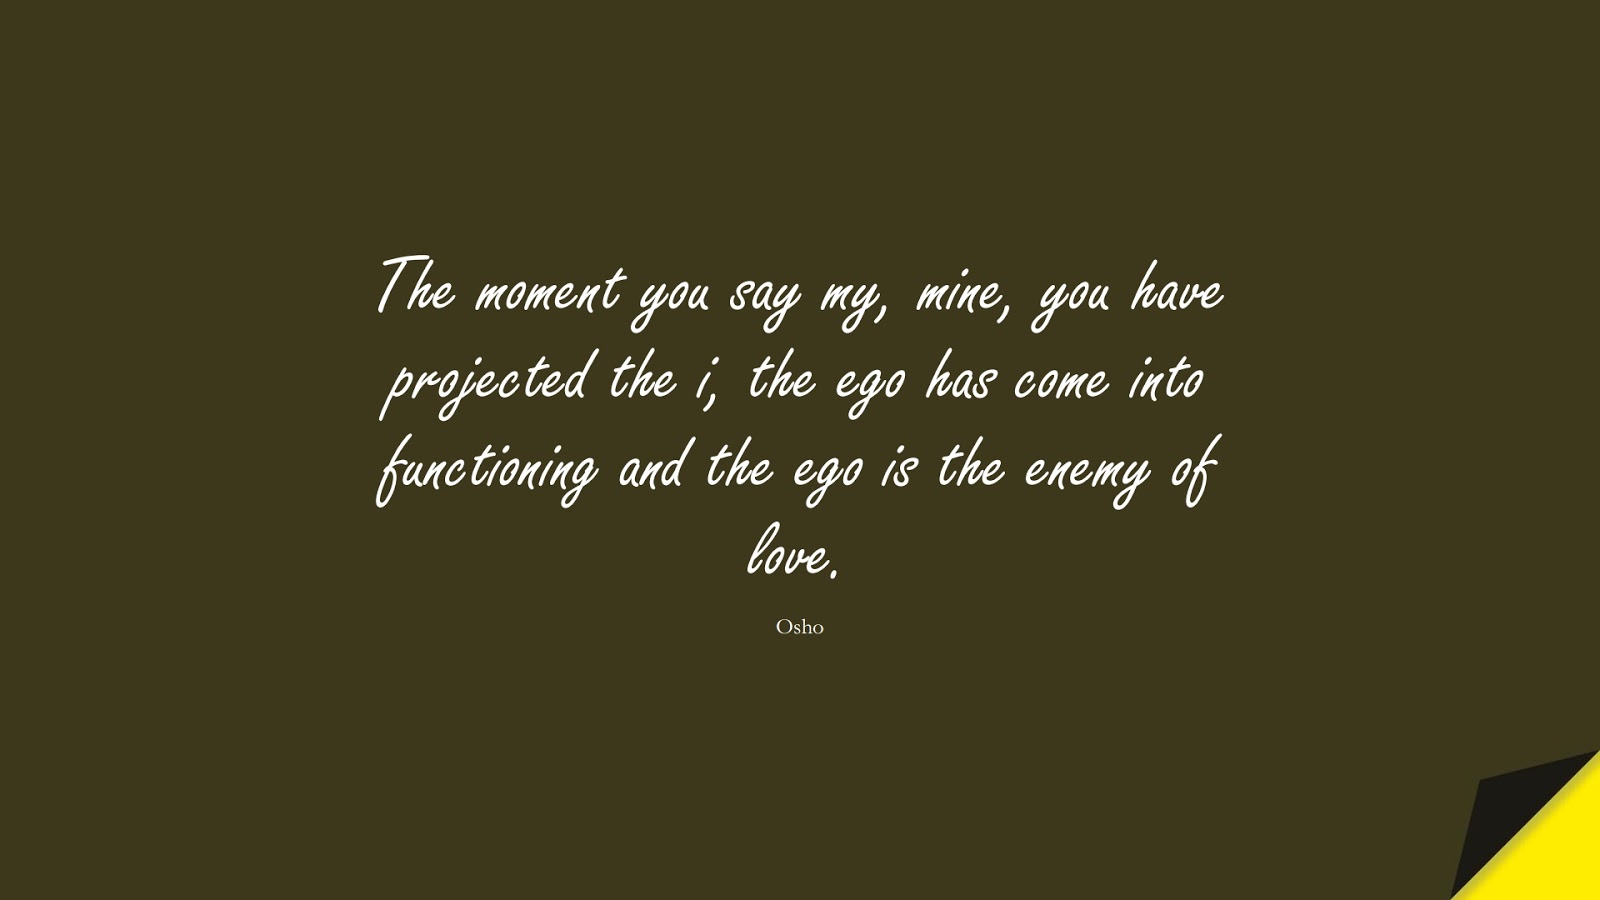 The moment you say my, mine, you have projected the i, the ego has come into functioning and the ego is the enemy of love. (Osho);  #LoveQuotes